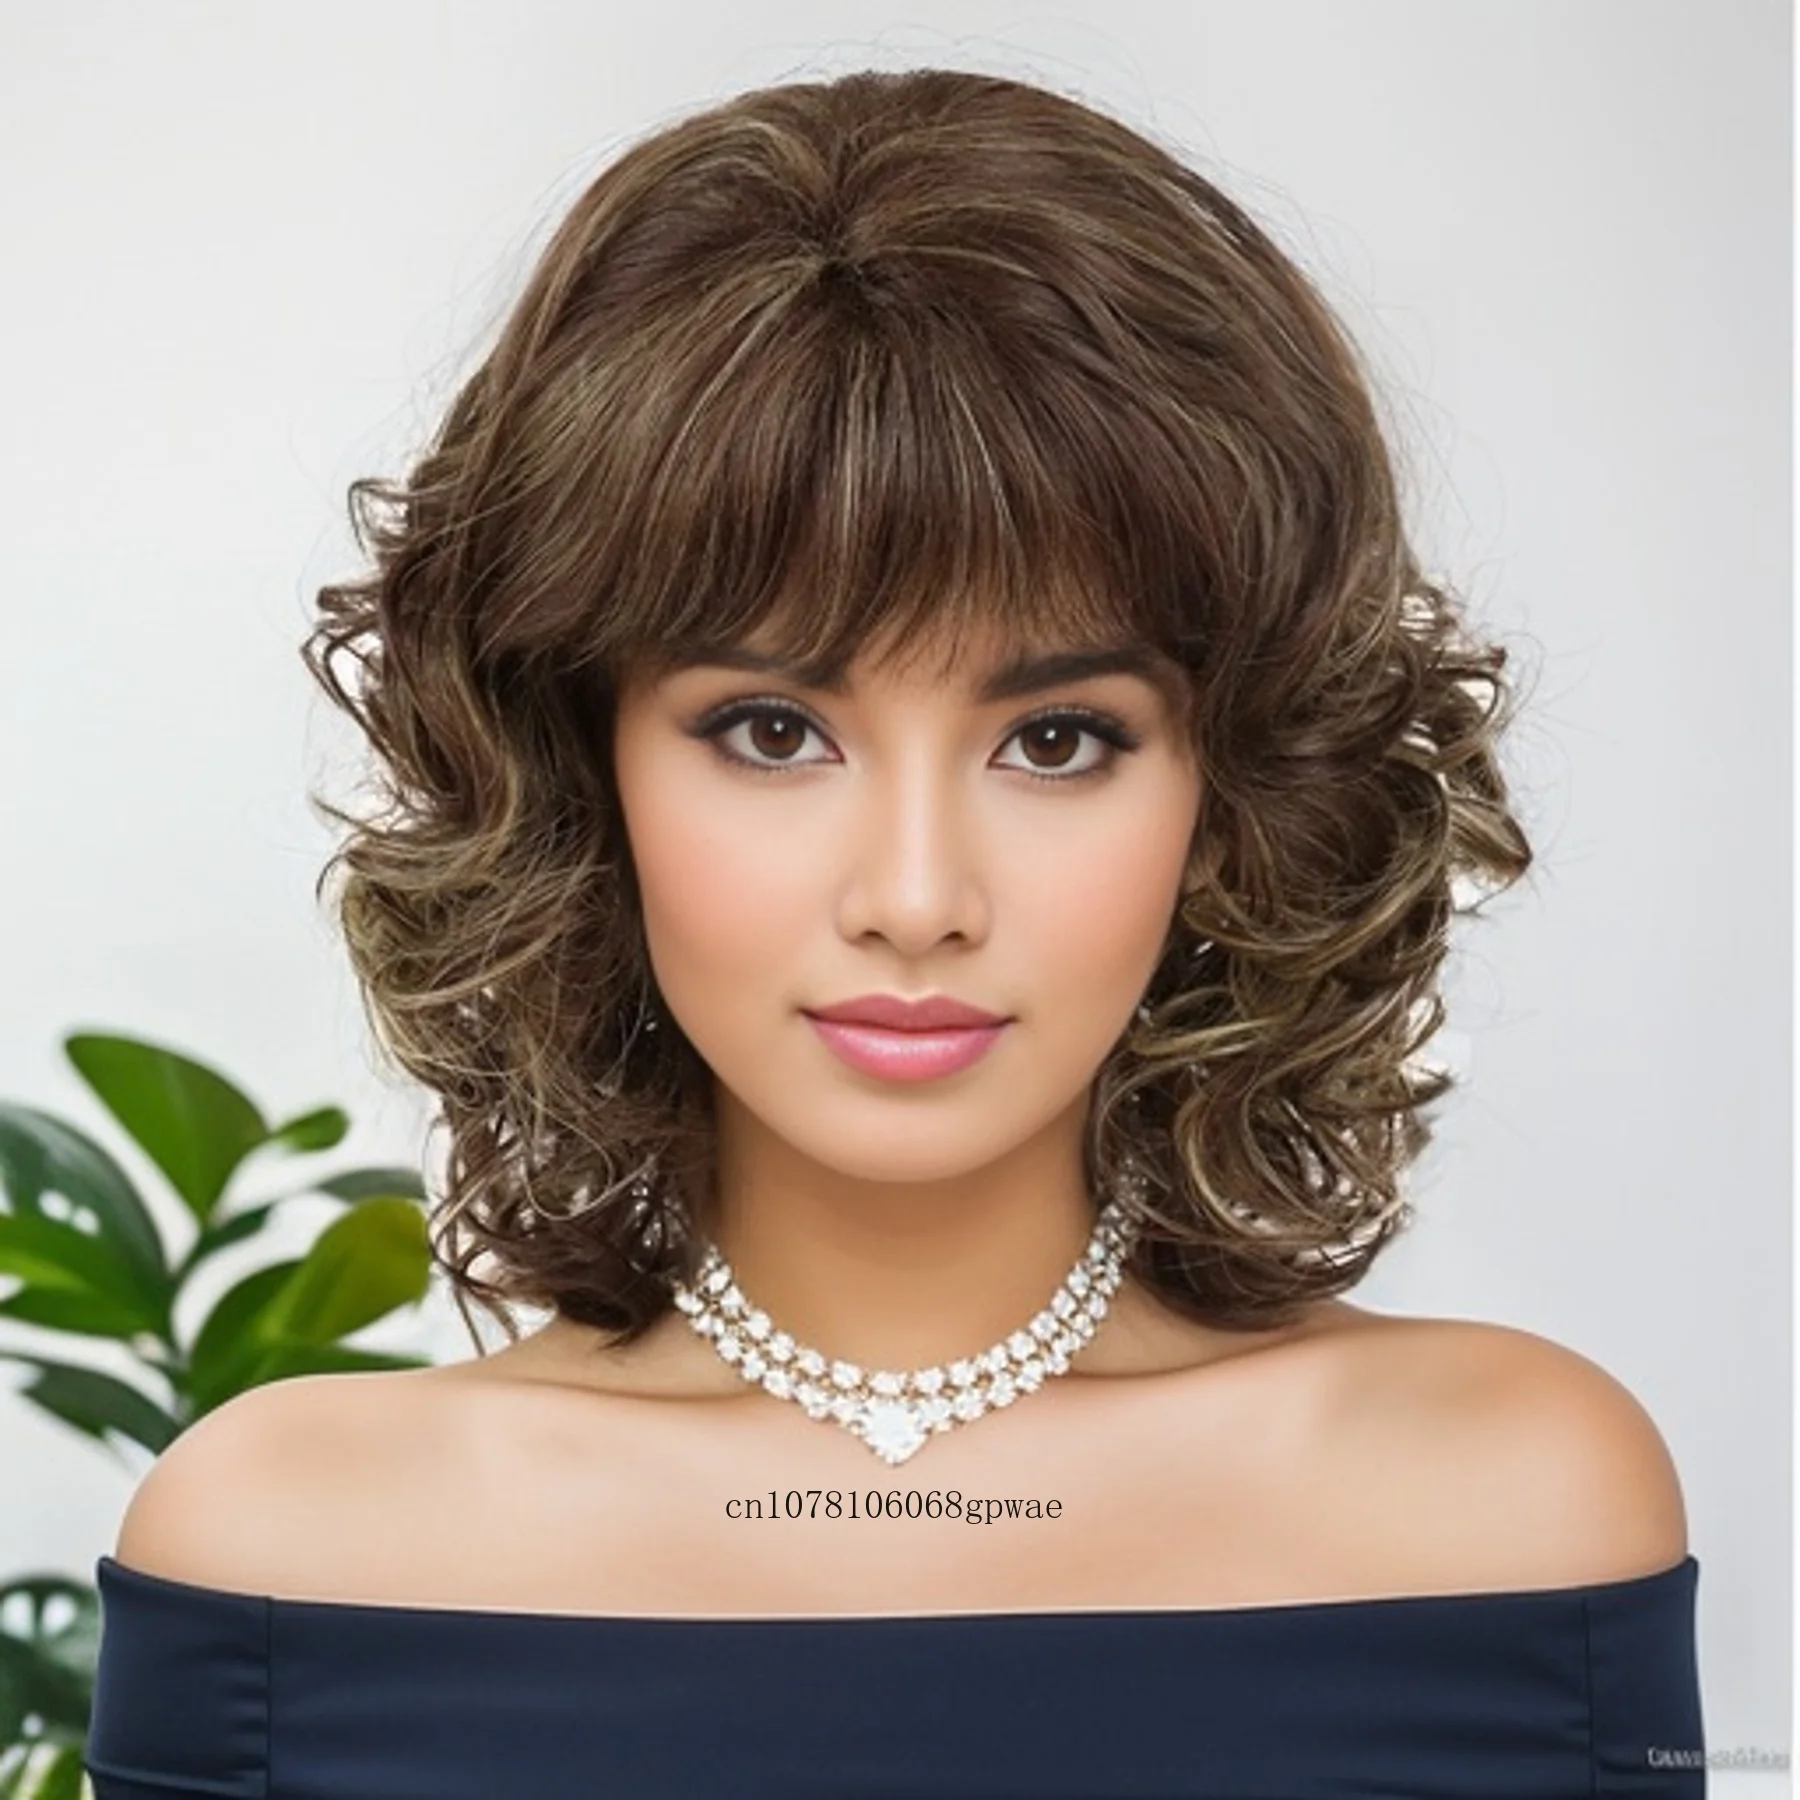 

Fluffy Brown Curly Wigs Synthetic Hair Bouncy Long Wavy Wig with Bangs for Women Ladies Daily Costume Mommy Wig Heat Resistant